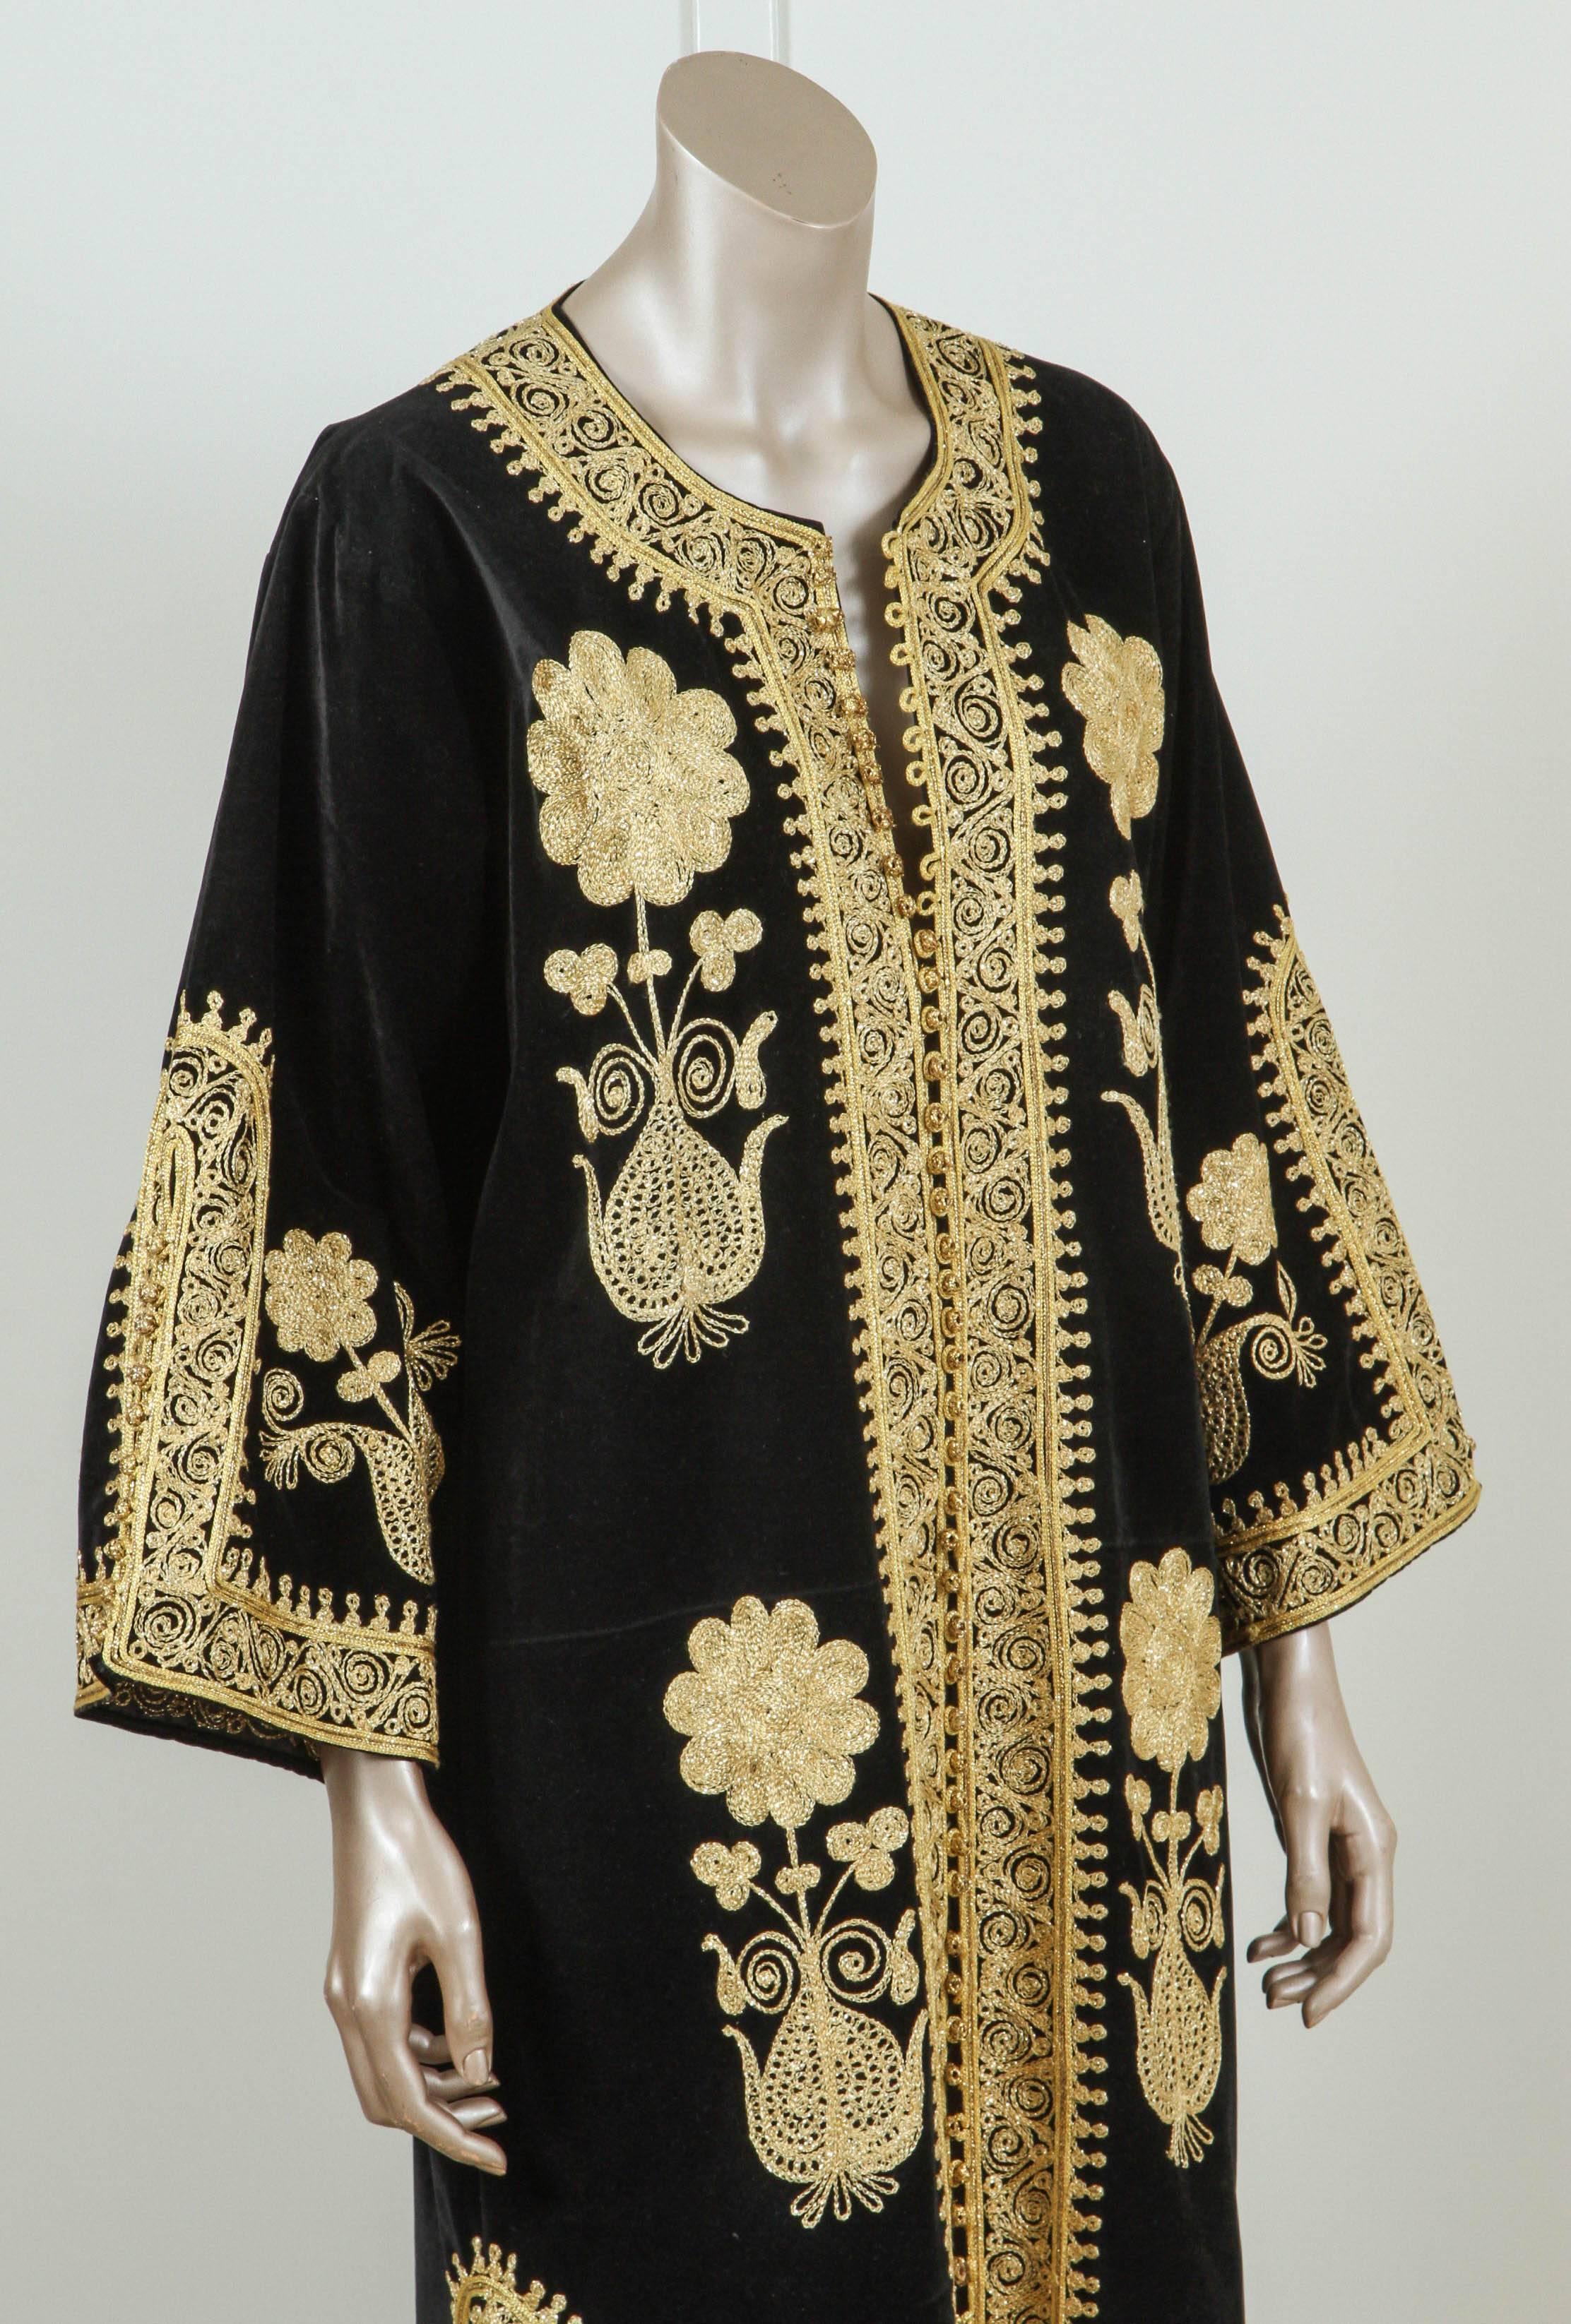 Elegant vintage designer Moroccan kaftan, black velvet embroidered with Turkish gold threads design all-over.
This black chic Gypsy Bohemian black velvet color maxi dress kaftan is embroidered and embellished with gold thread metallic designs and it